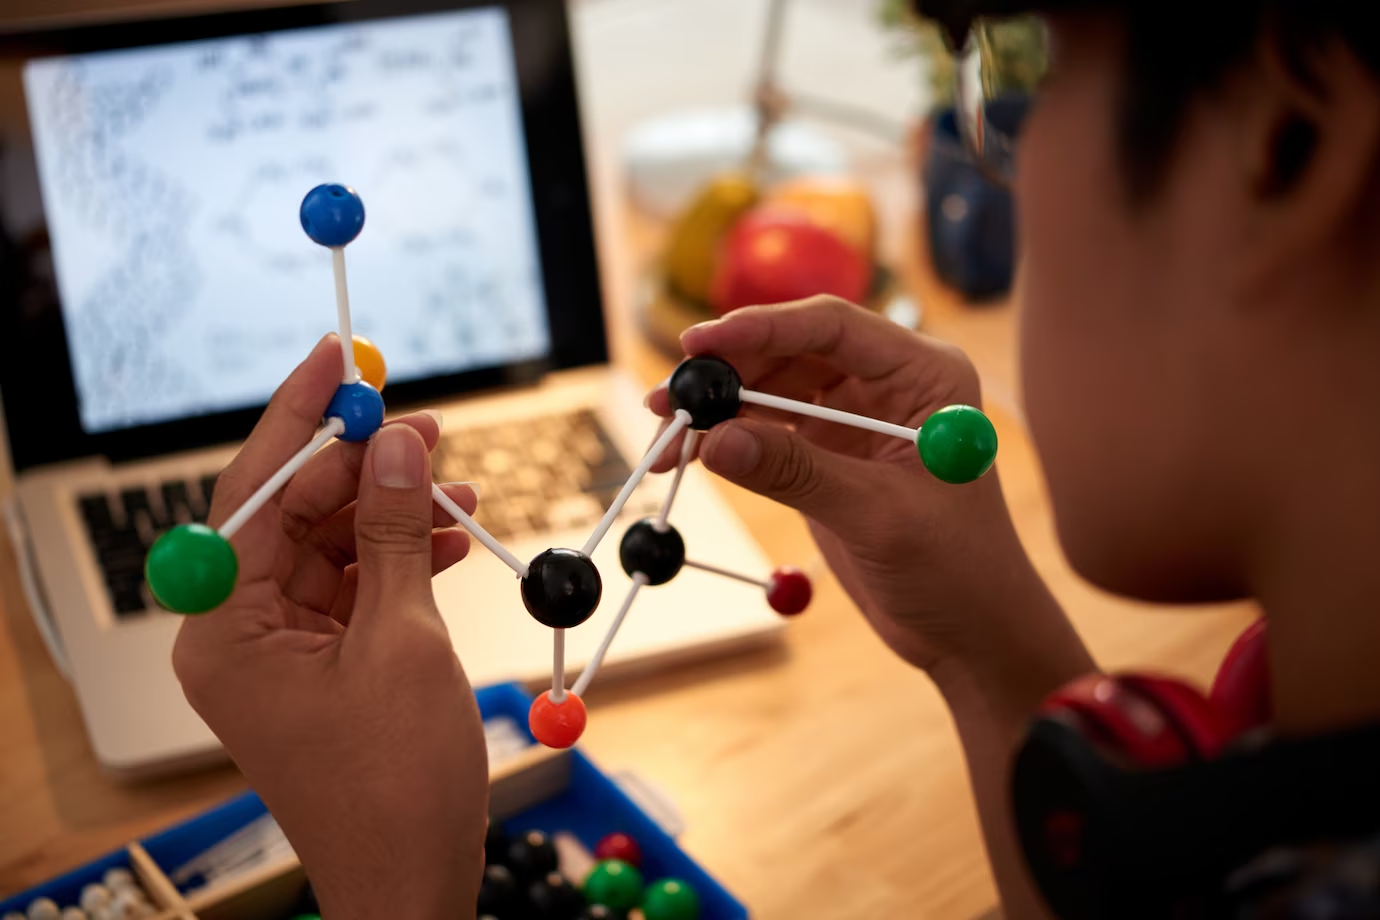 Science enthusiast examines molecular models with passion.